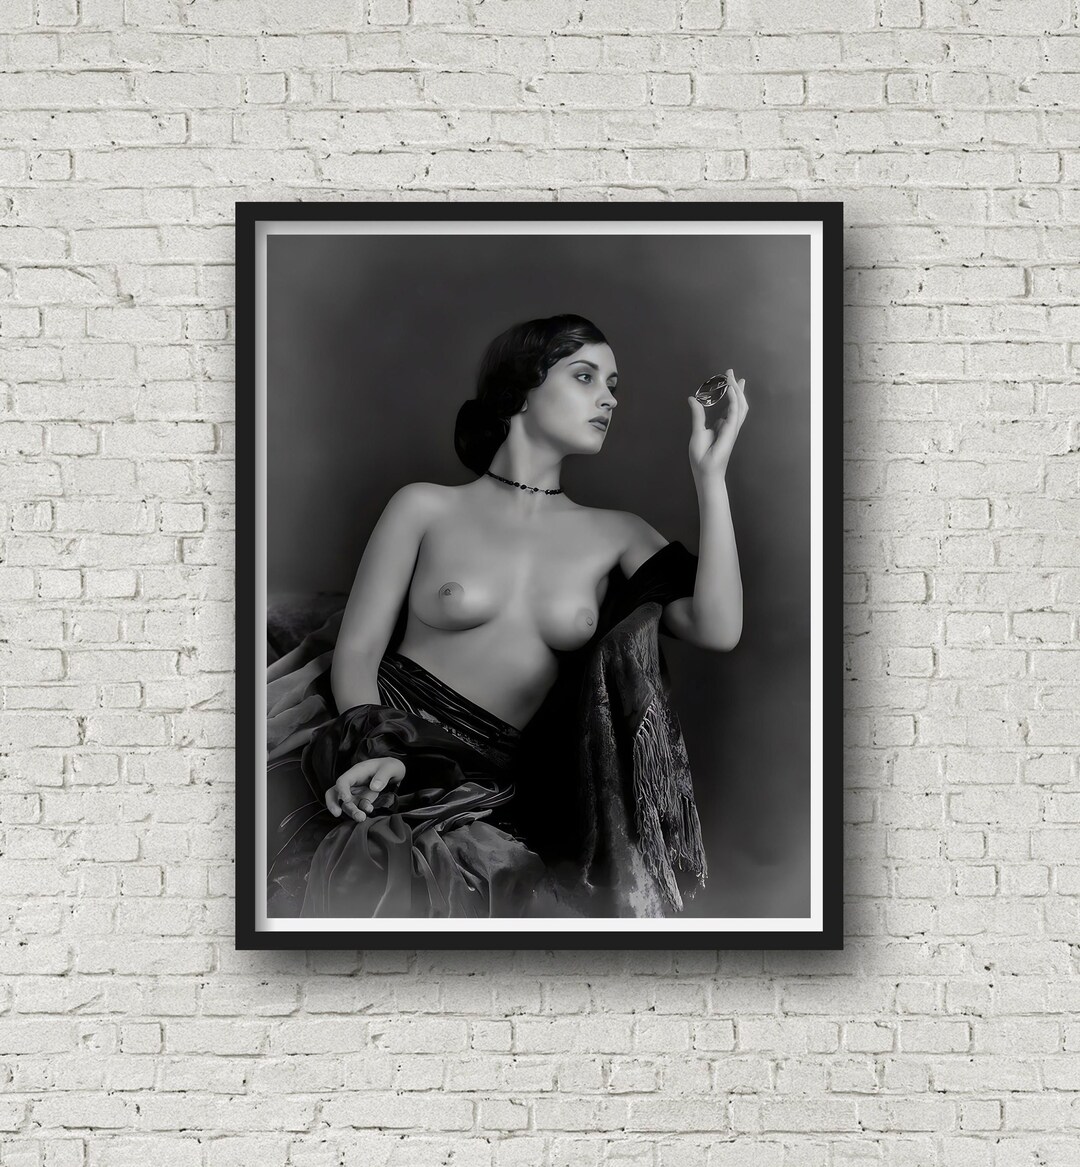 Topless Woman Holding Hand Mirror Vintage Nude Photography Powder